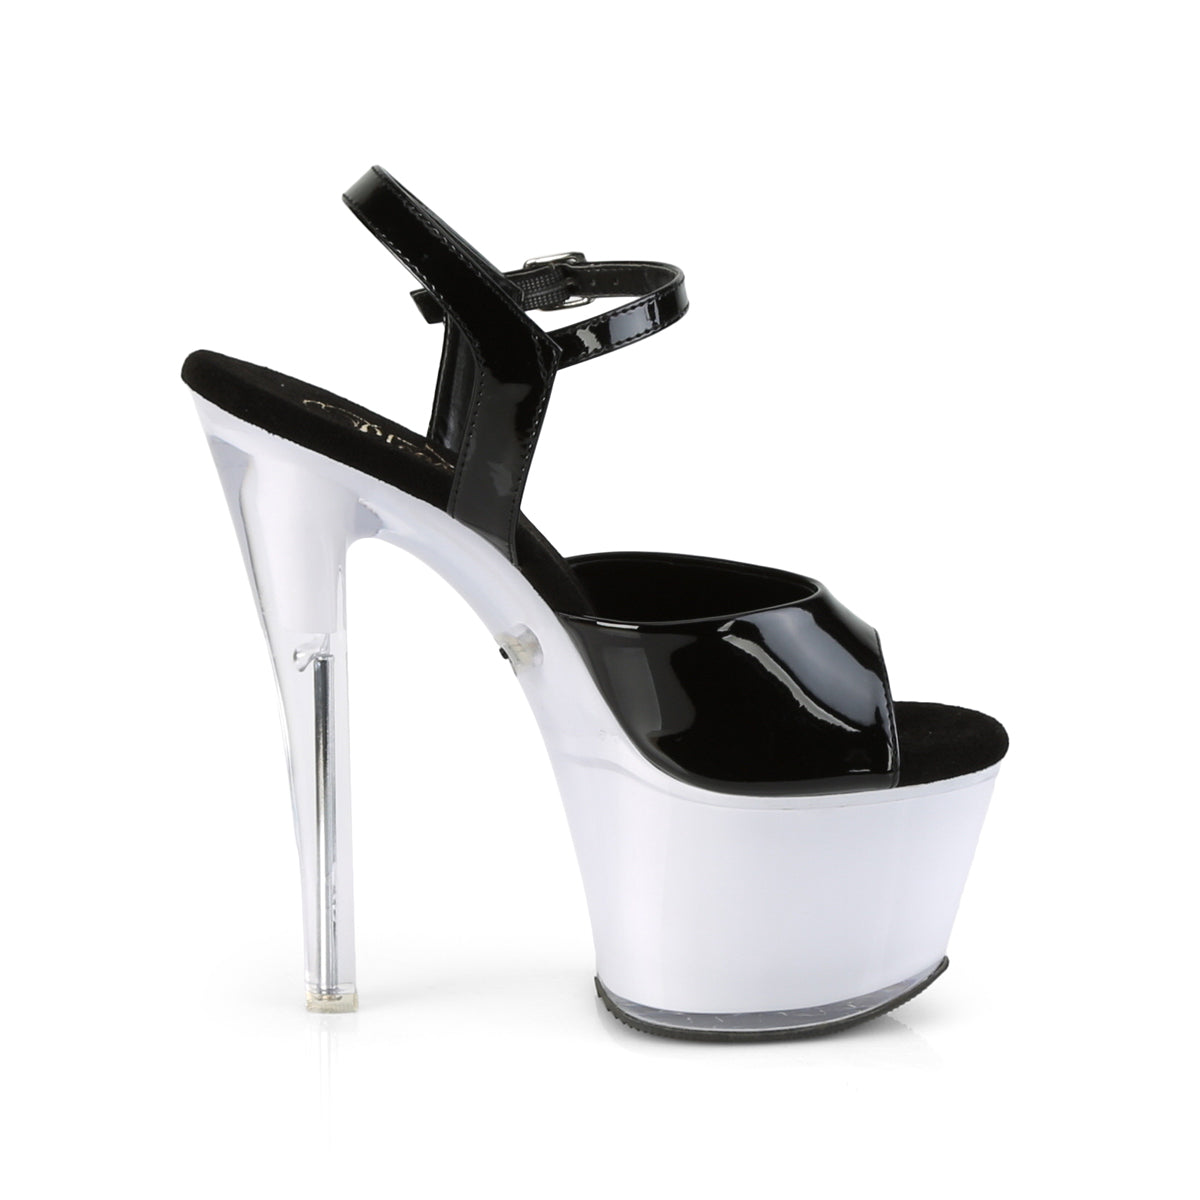 DISCOLITE-709 7" Black and White Glow Pole Dancer Platforms-Pleaser- Sexy Shoes Fetish Heels